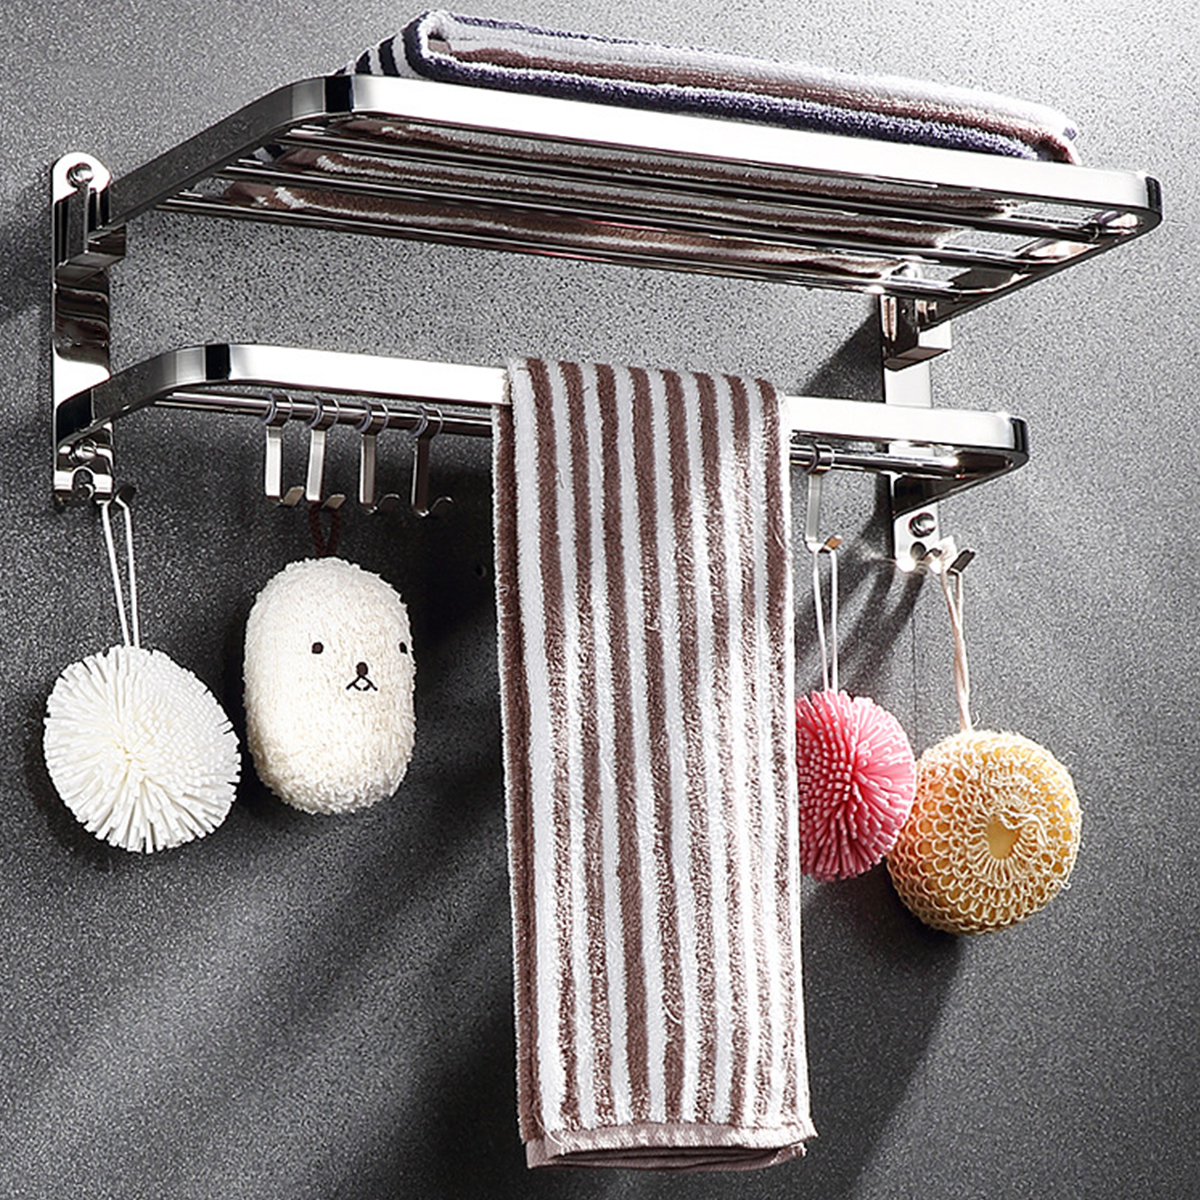 Bakeey  Stainless Steel Perforated Towel Rack Double Shelf Strong Bearing Capacity For Home Hotel